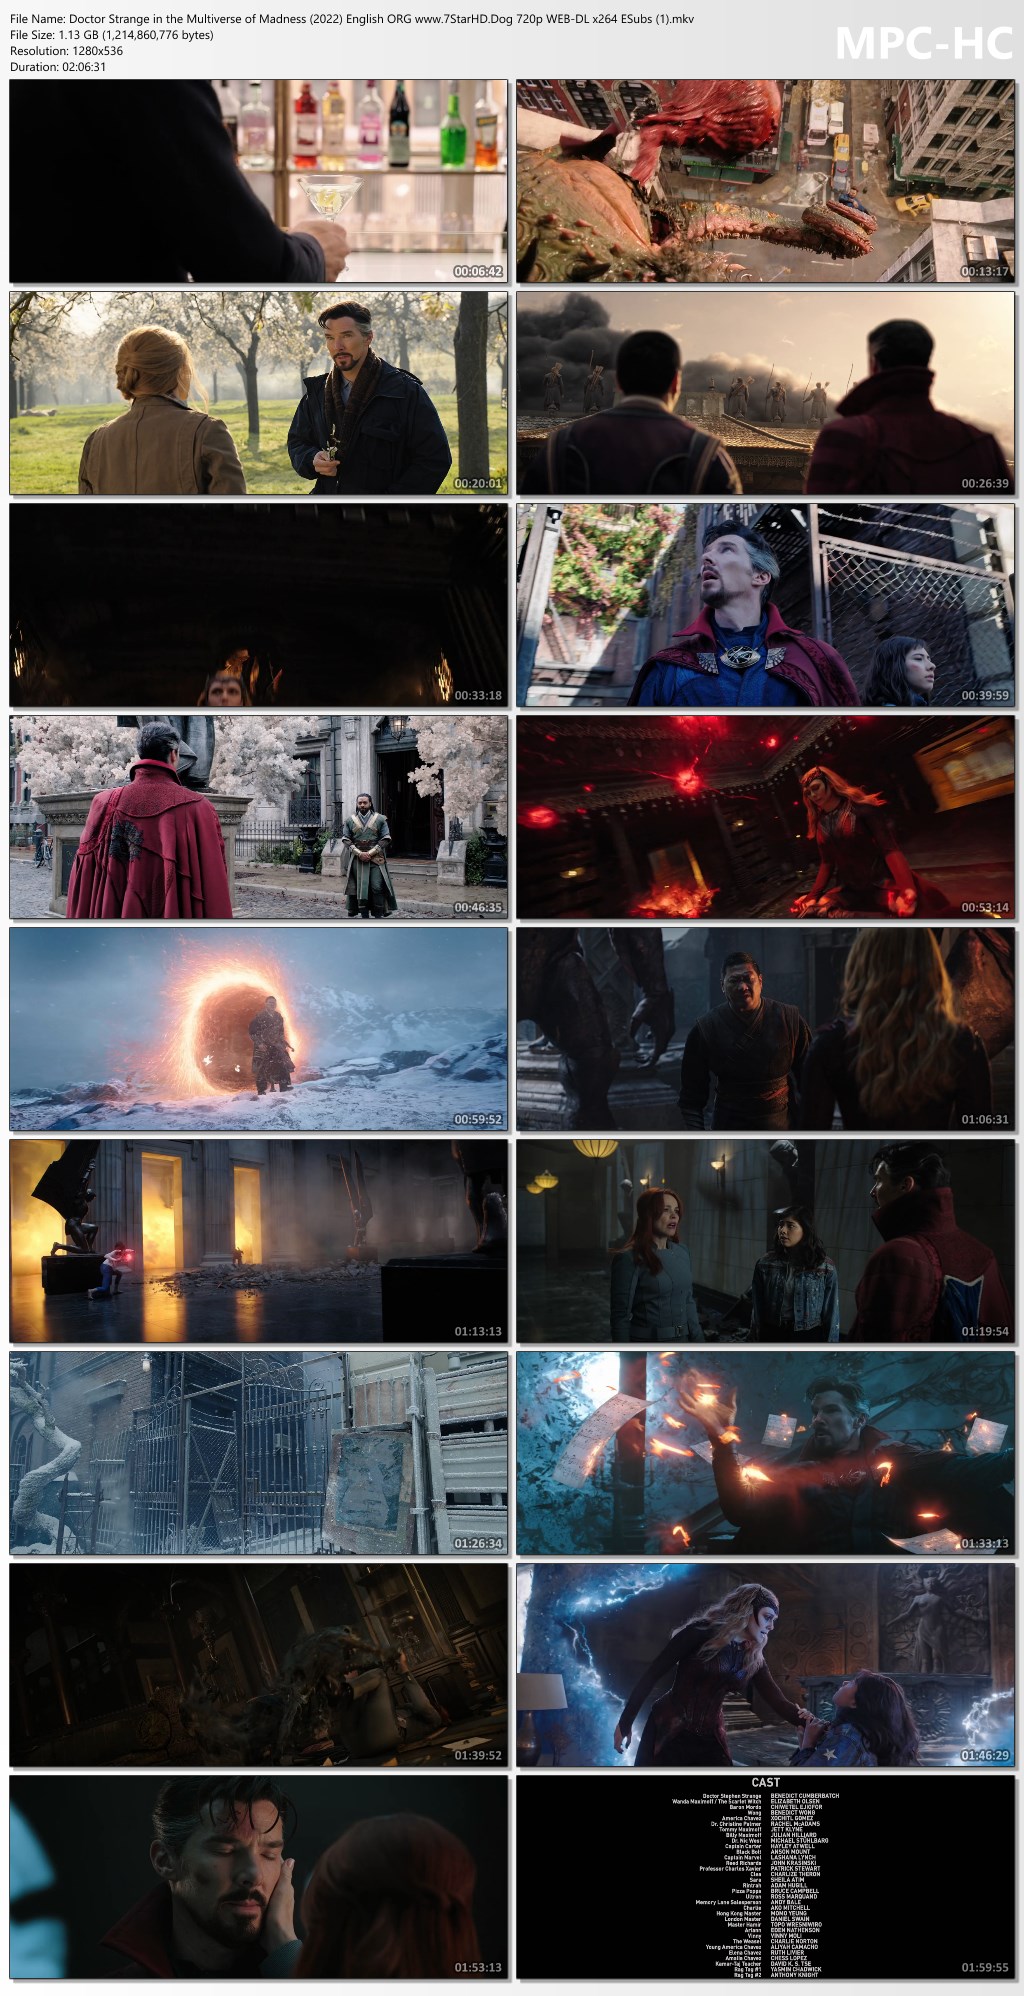 Doctor Strange in the Multiverse of Madness 2022 English ORG 720p WEB-DL 1.1GB ESubs Download